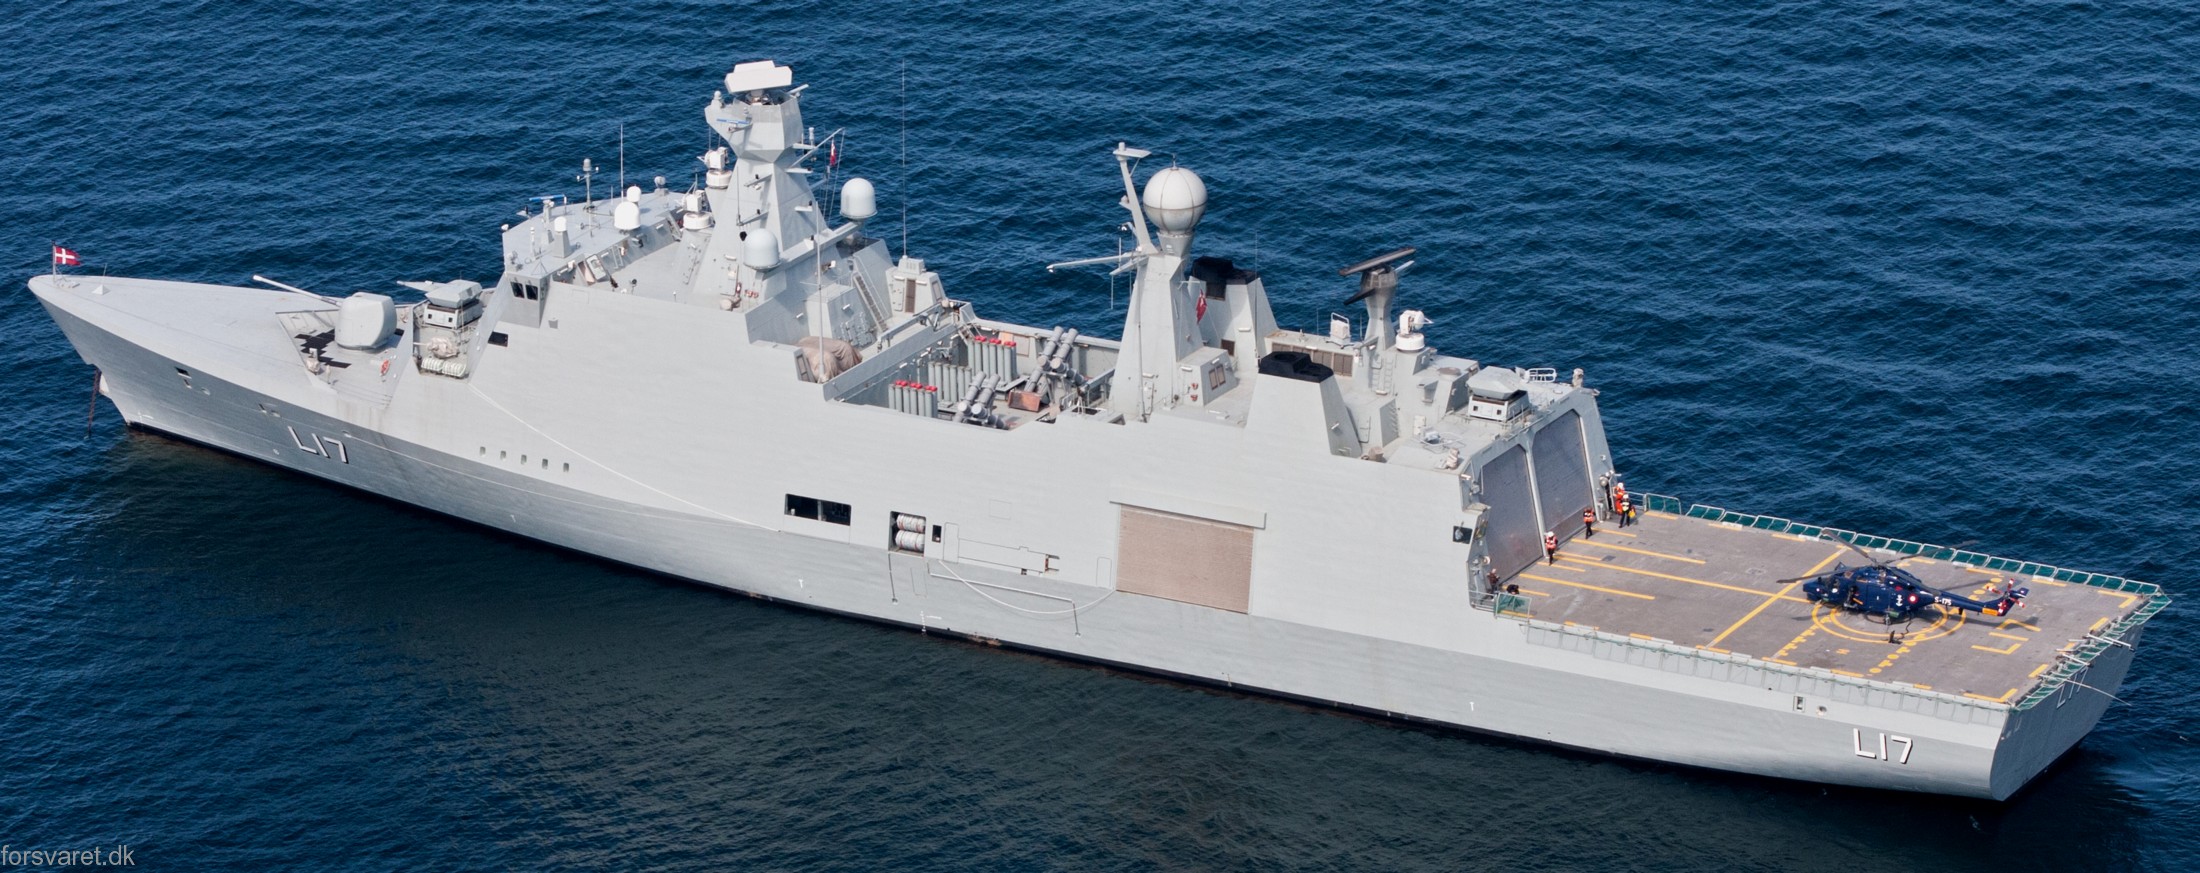 f-342 hdms esbern snare l-17 frigate command support ship royal danish navy 63 westland lynx helicopter